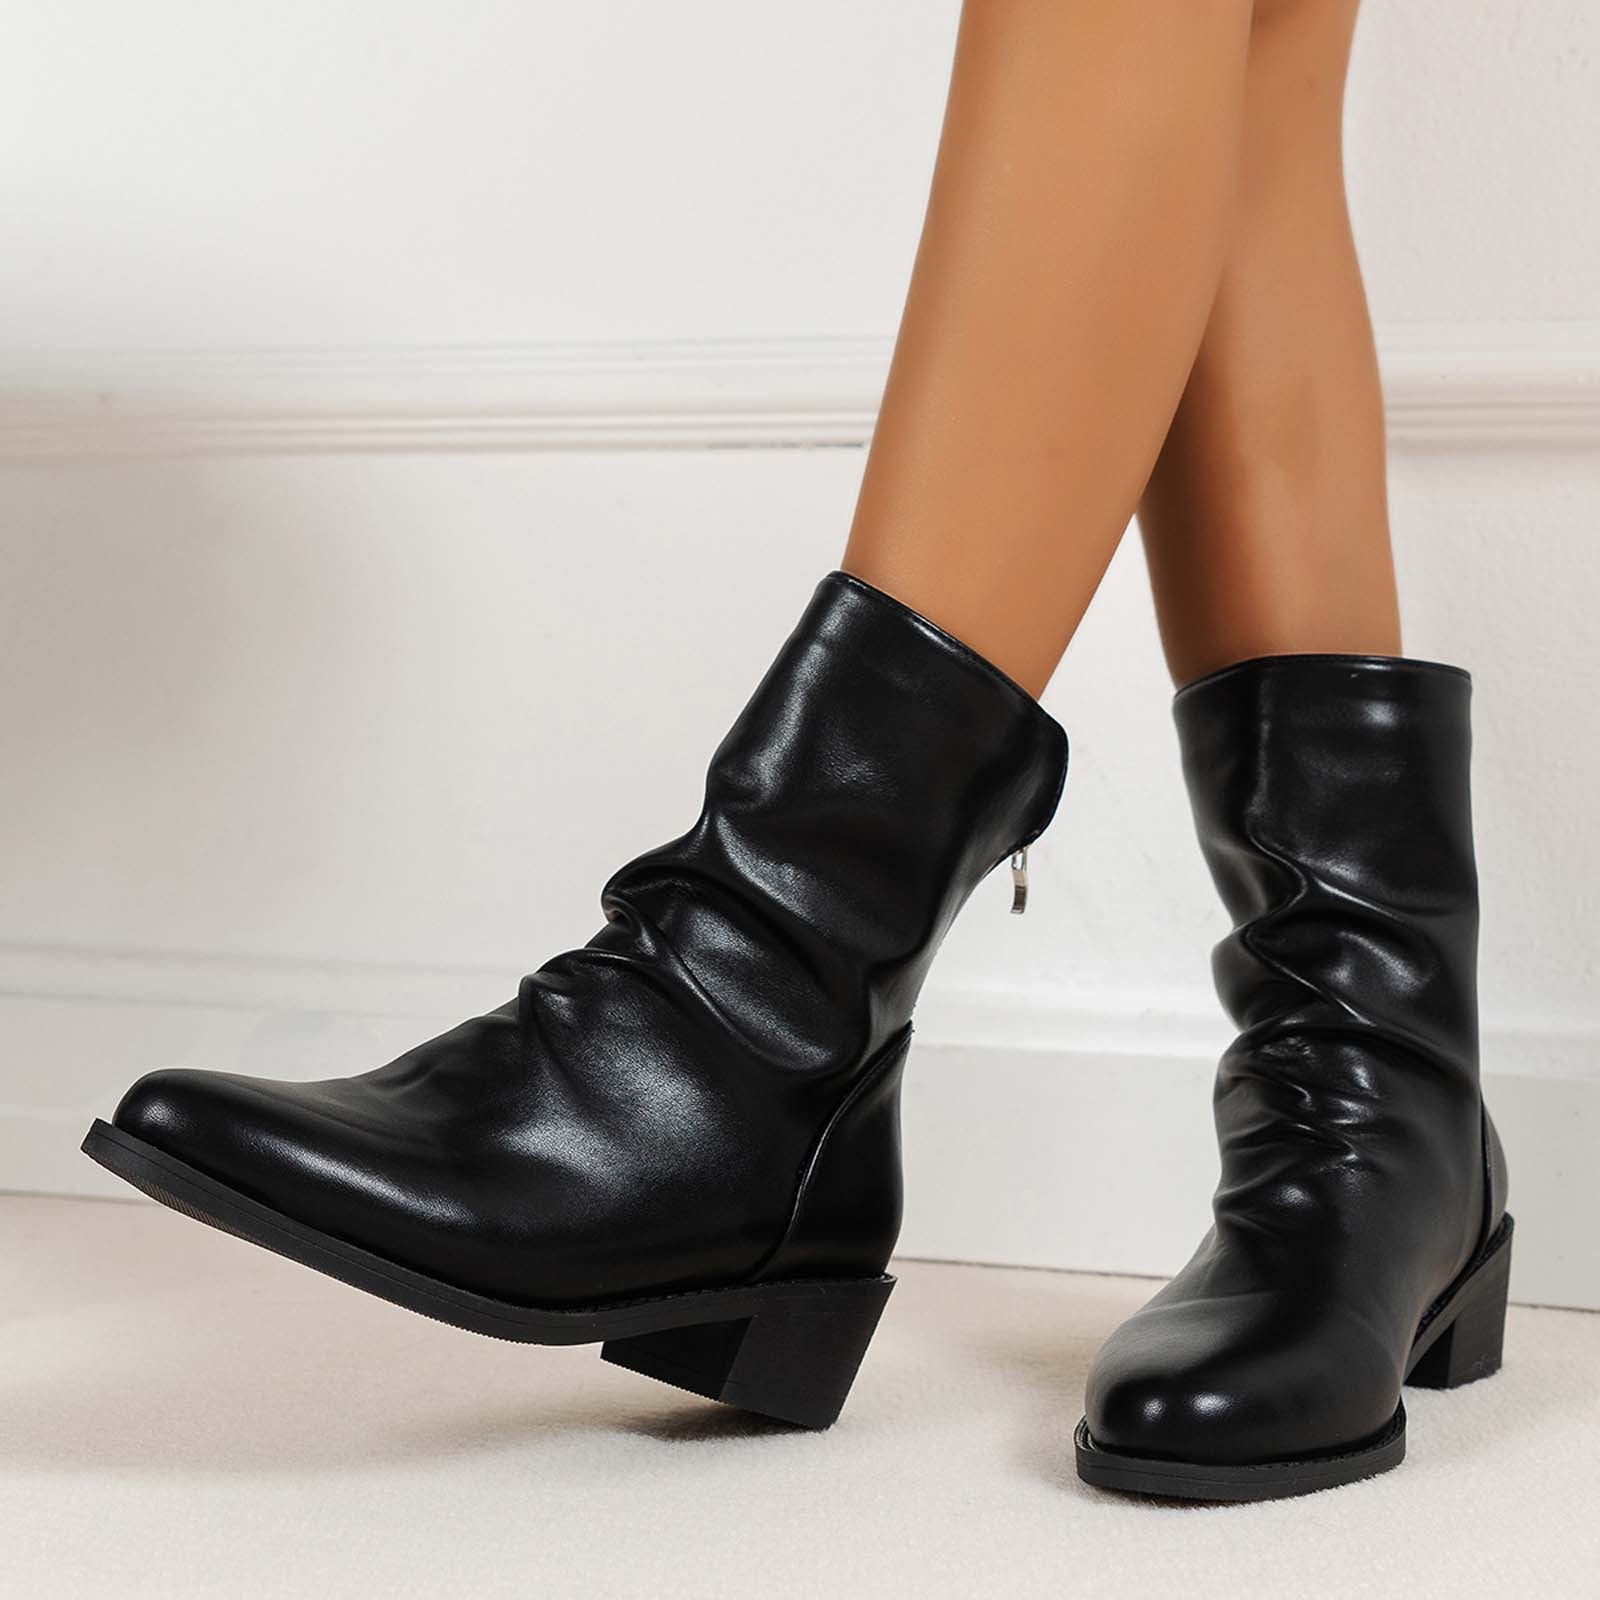 Faux Patent Leather Mid-Calf Boots Black Women's 9.5